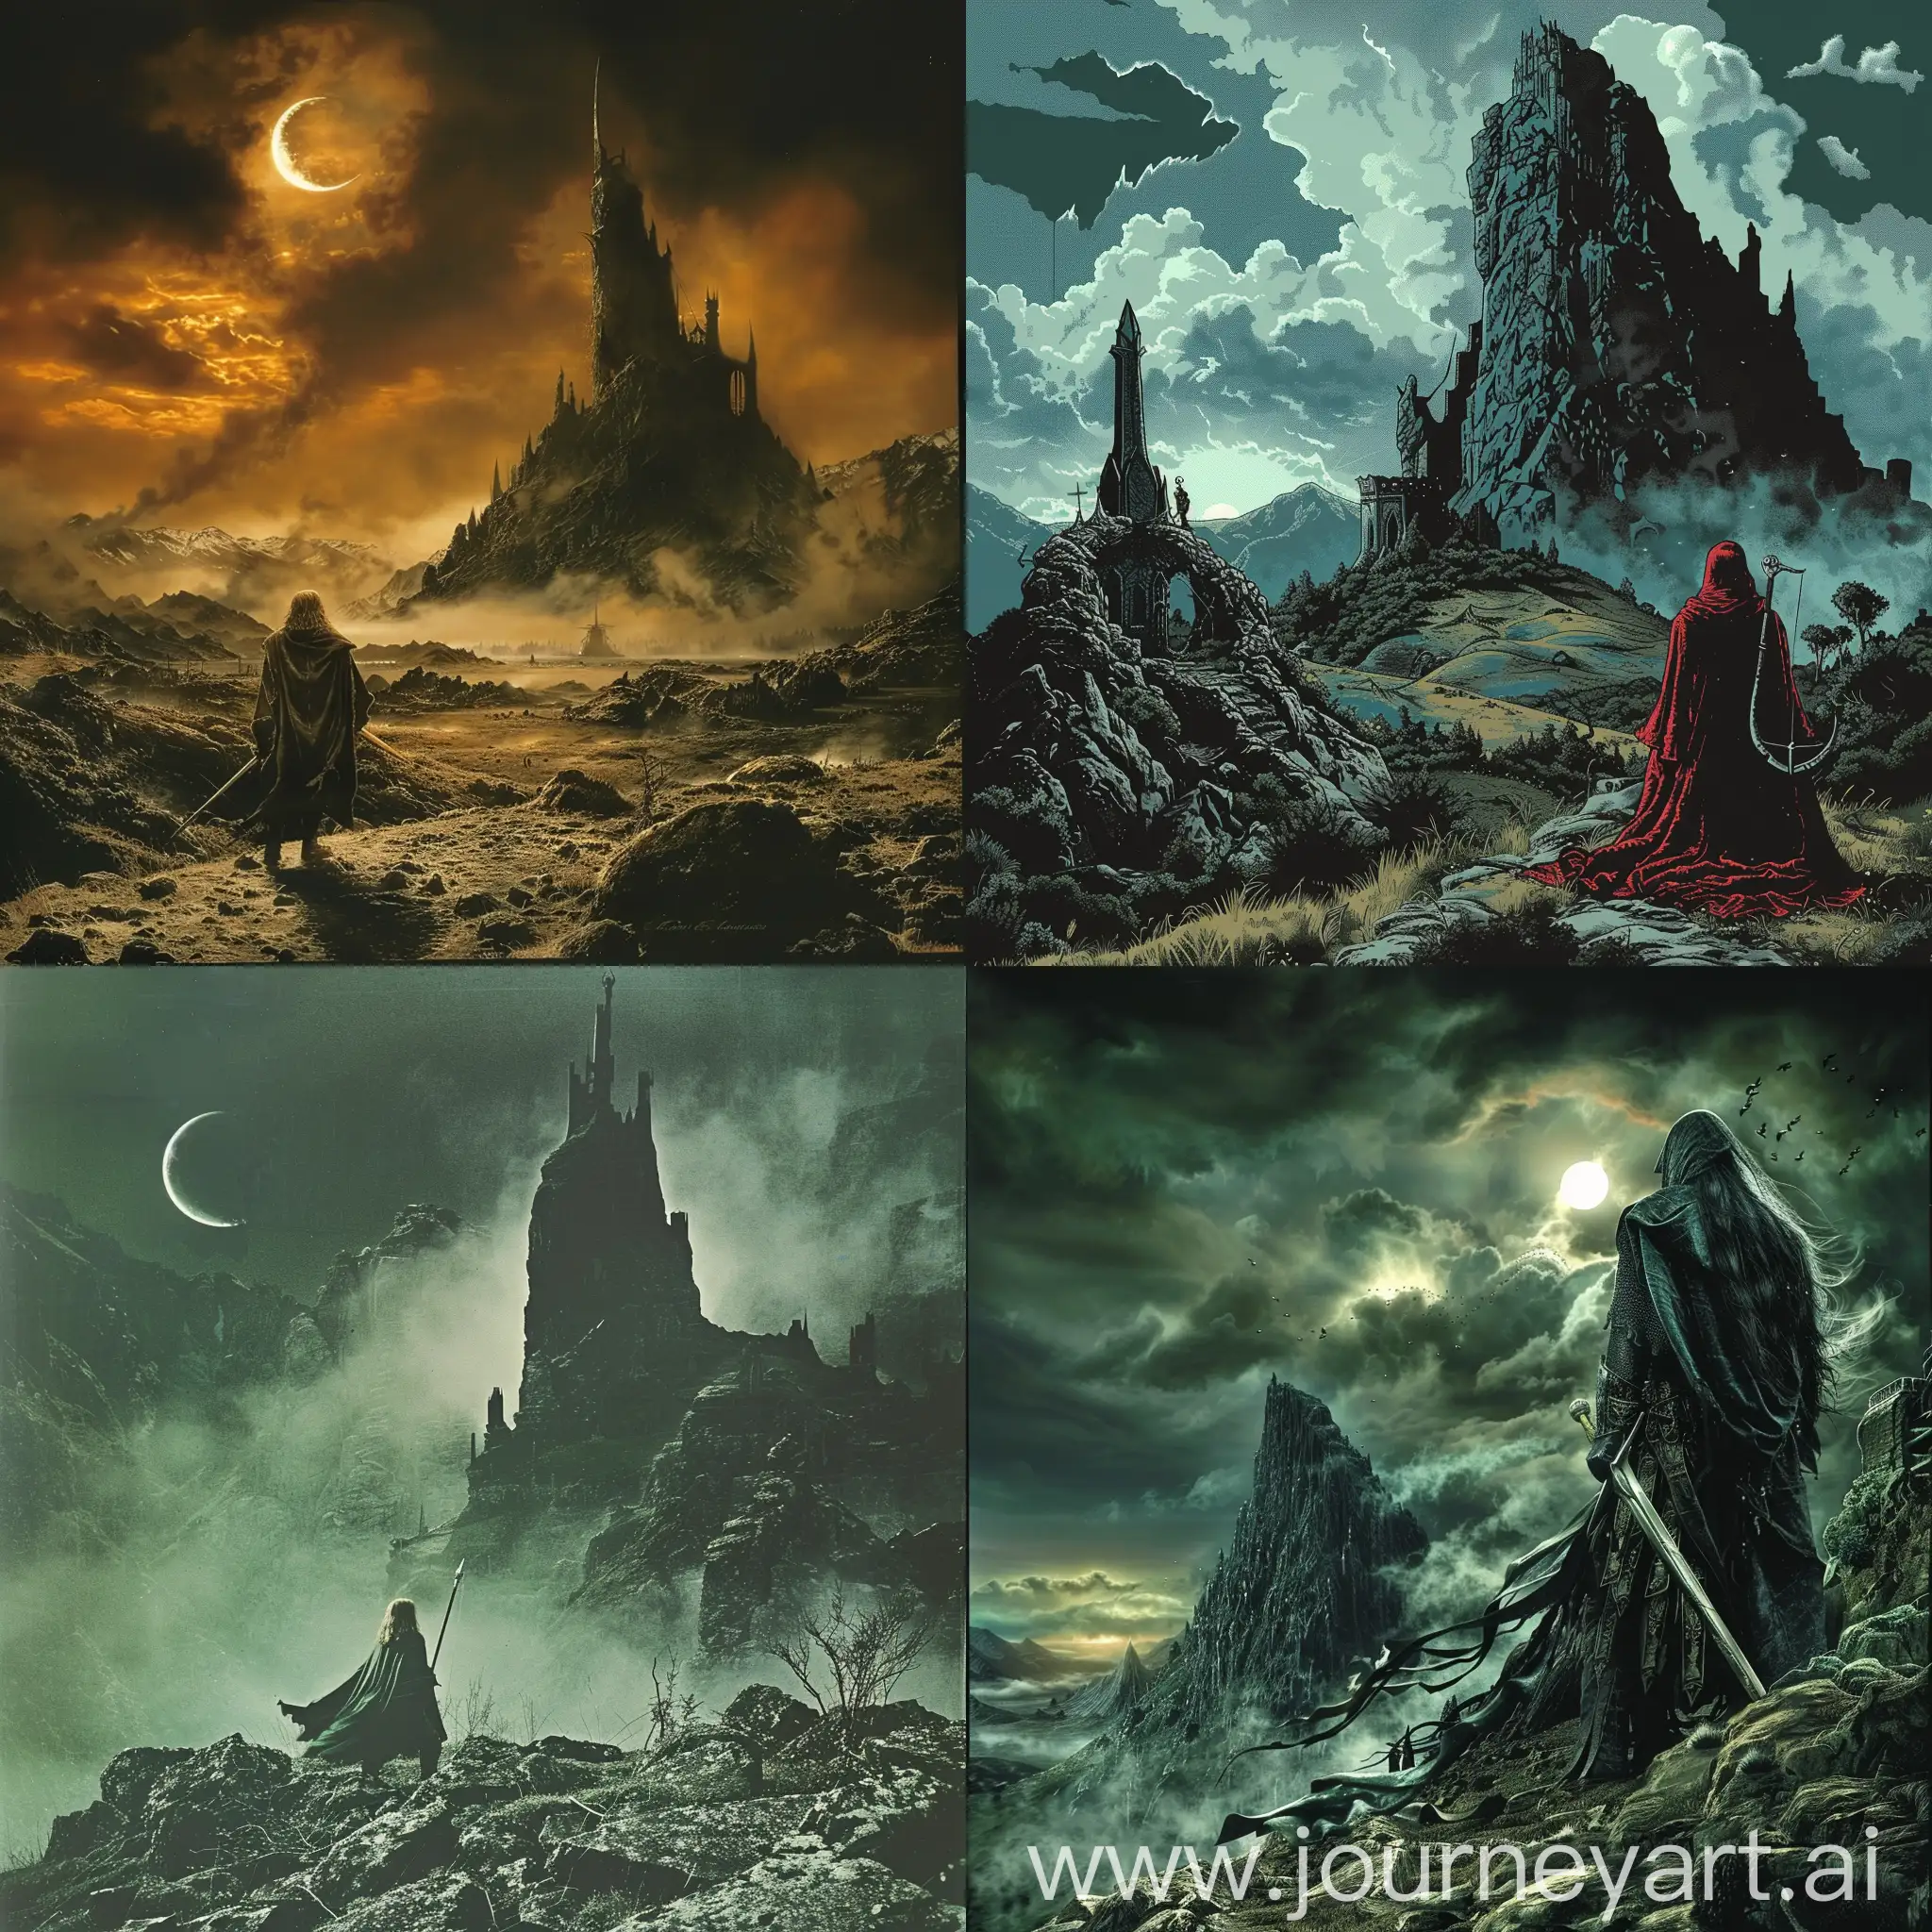 make an 70's dark fantasy image of lord of the rings
